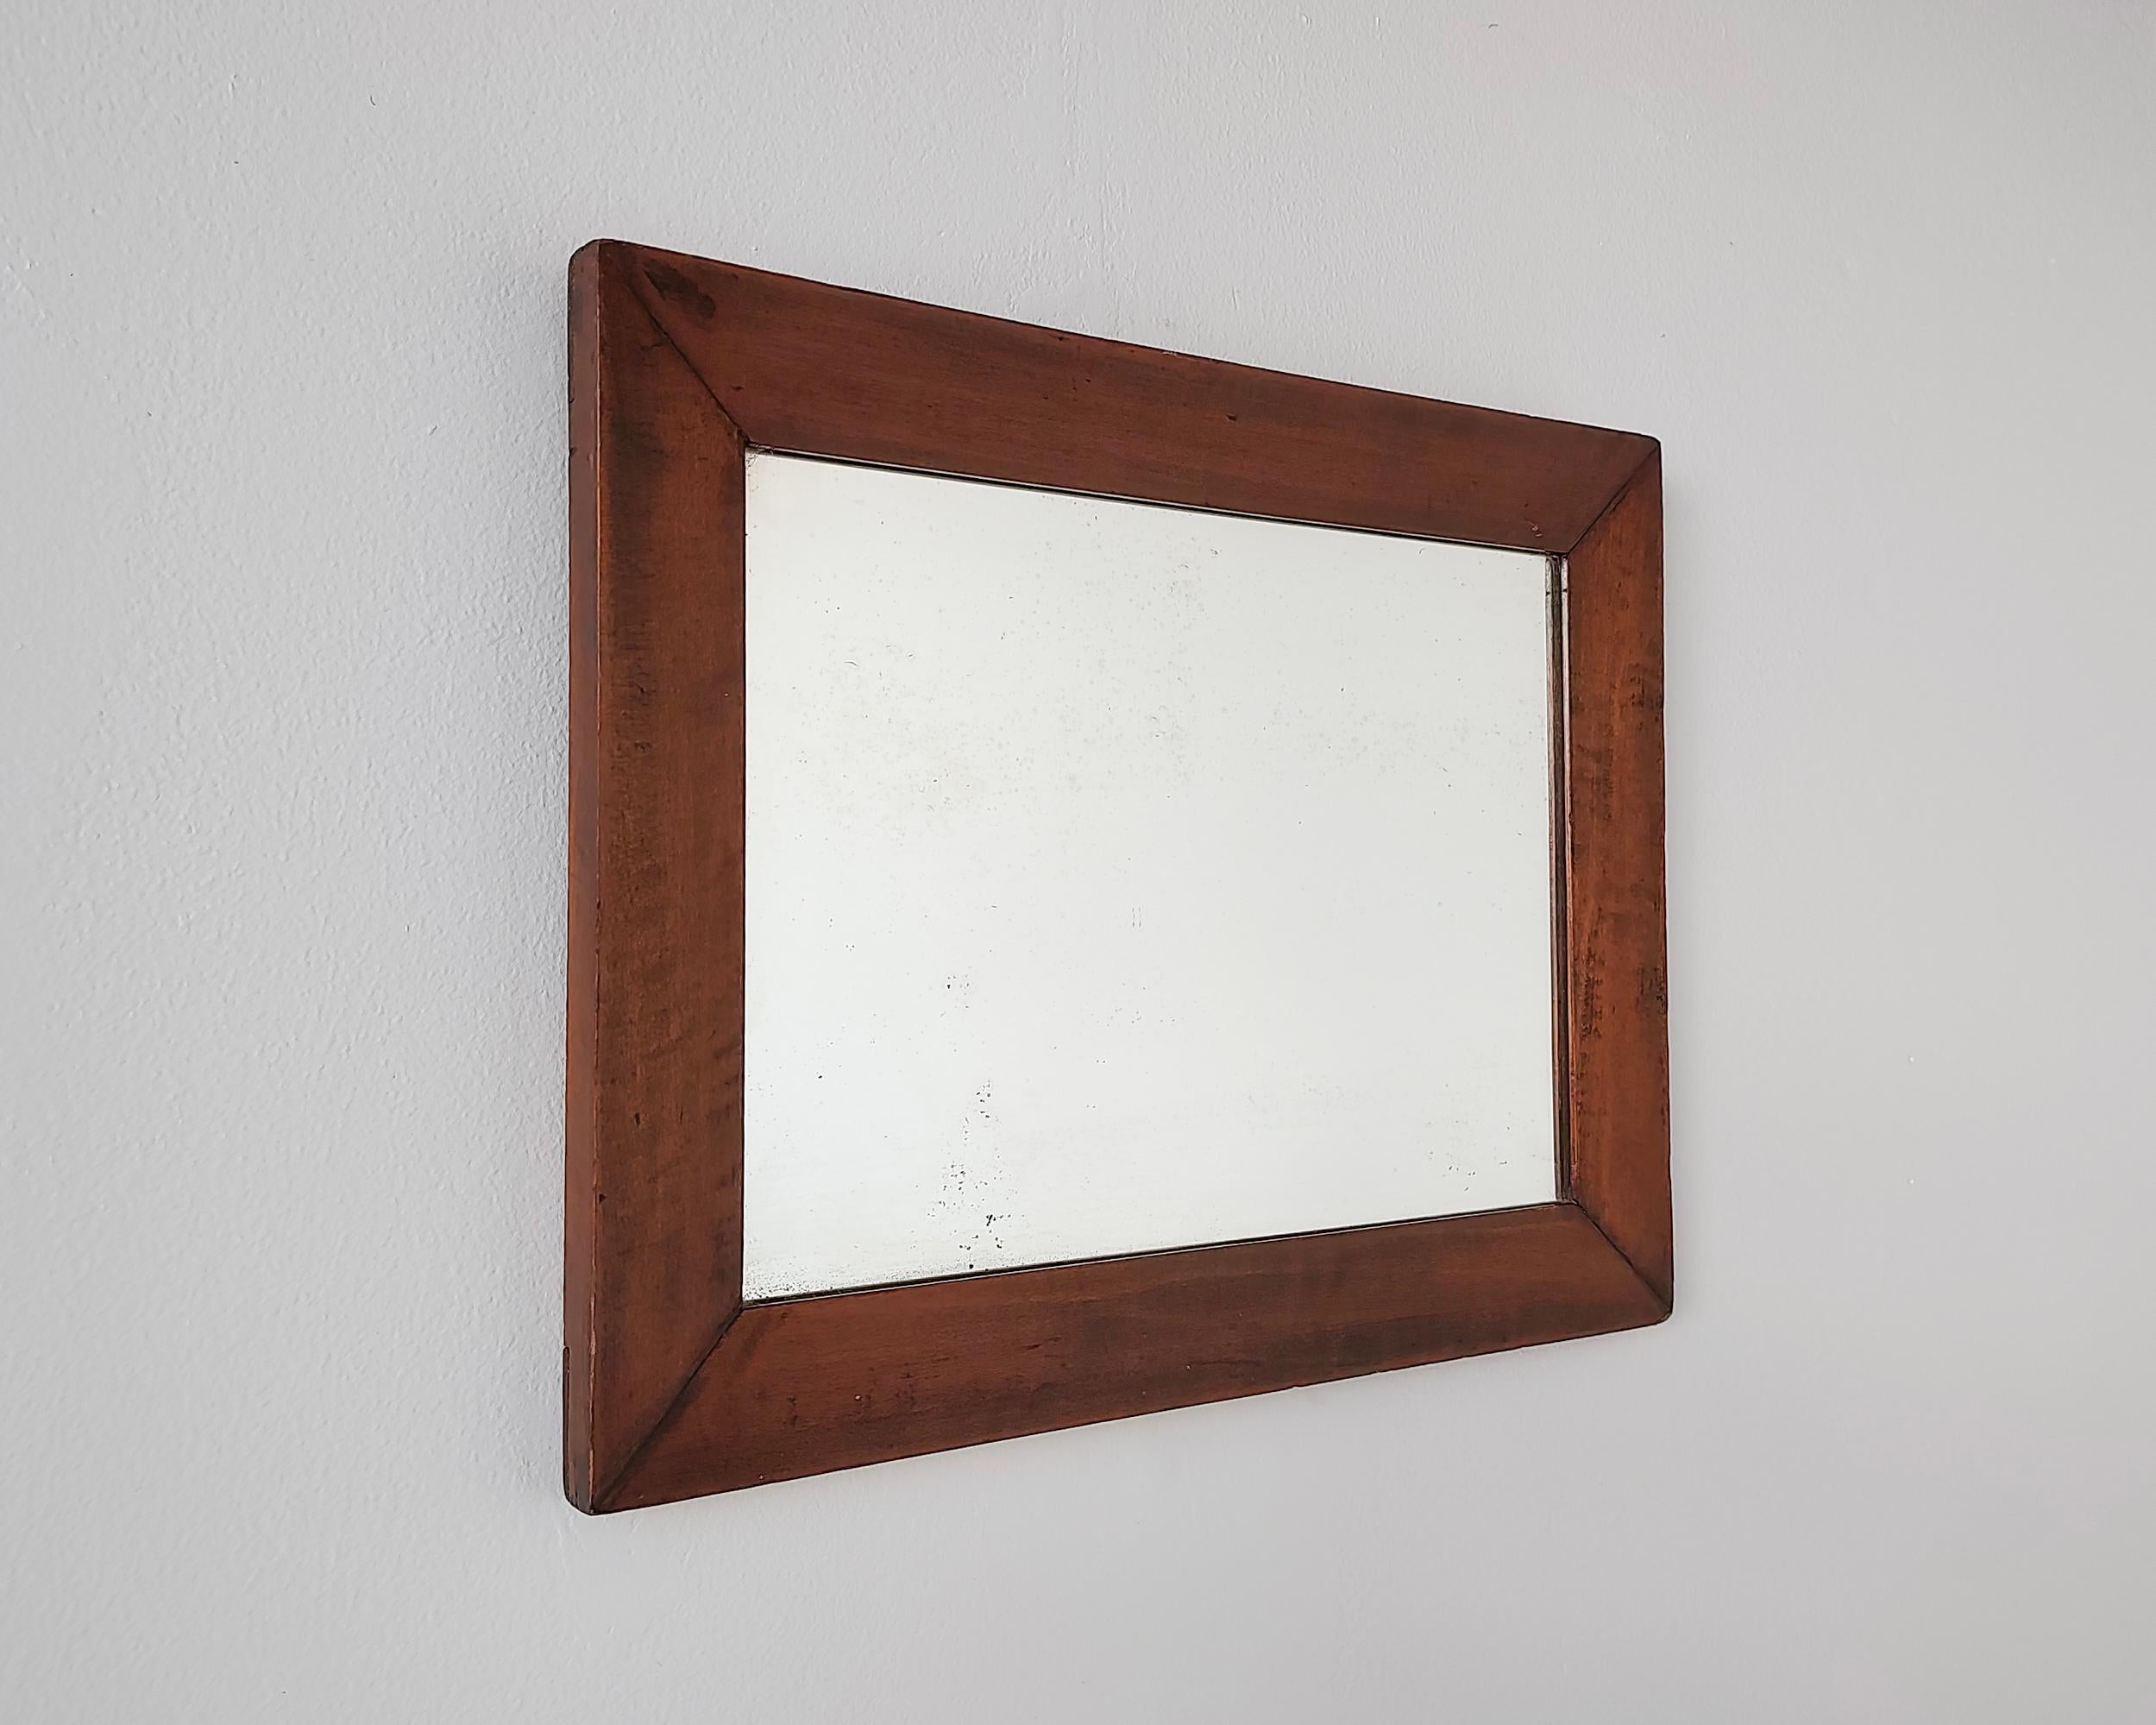 American Craftsman Small Antique Mitered Wood Frame Wall Mirror Early 20th Century For Sale